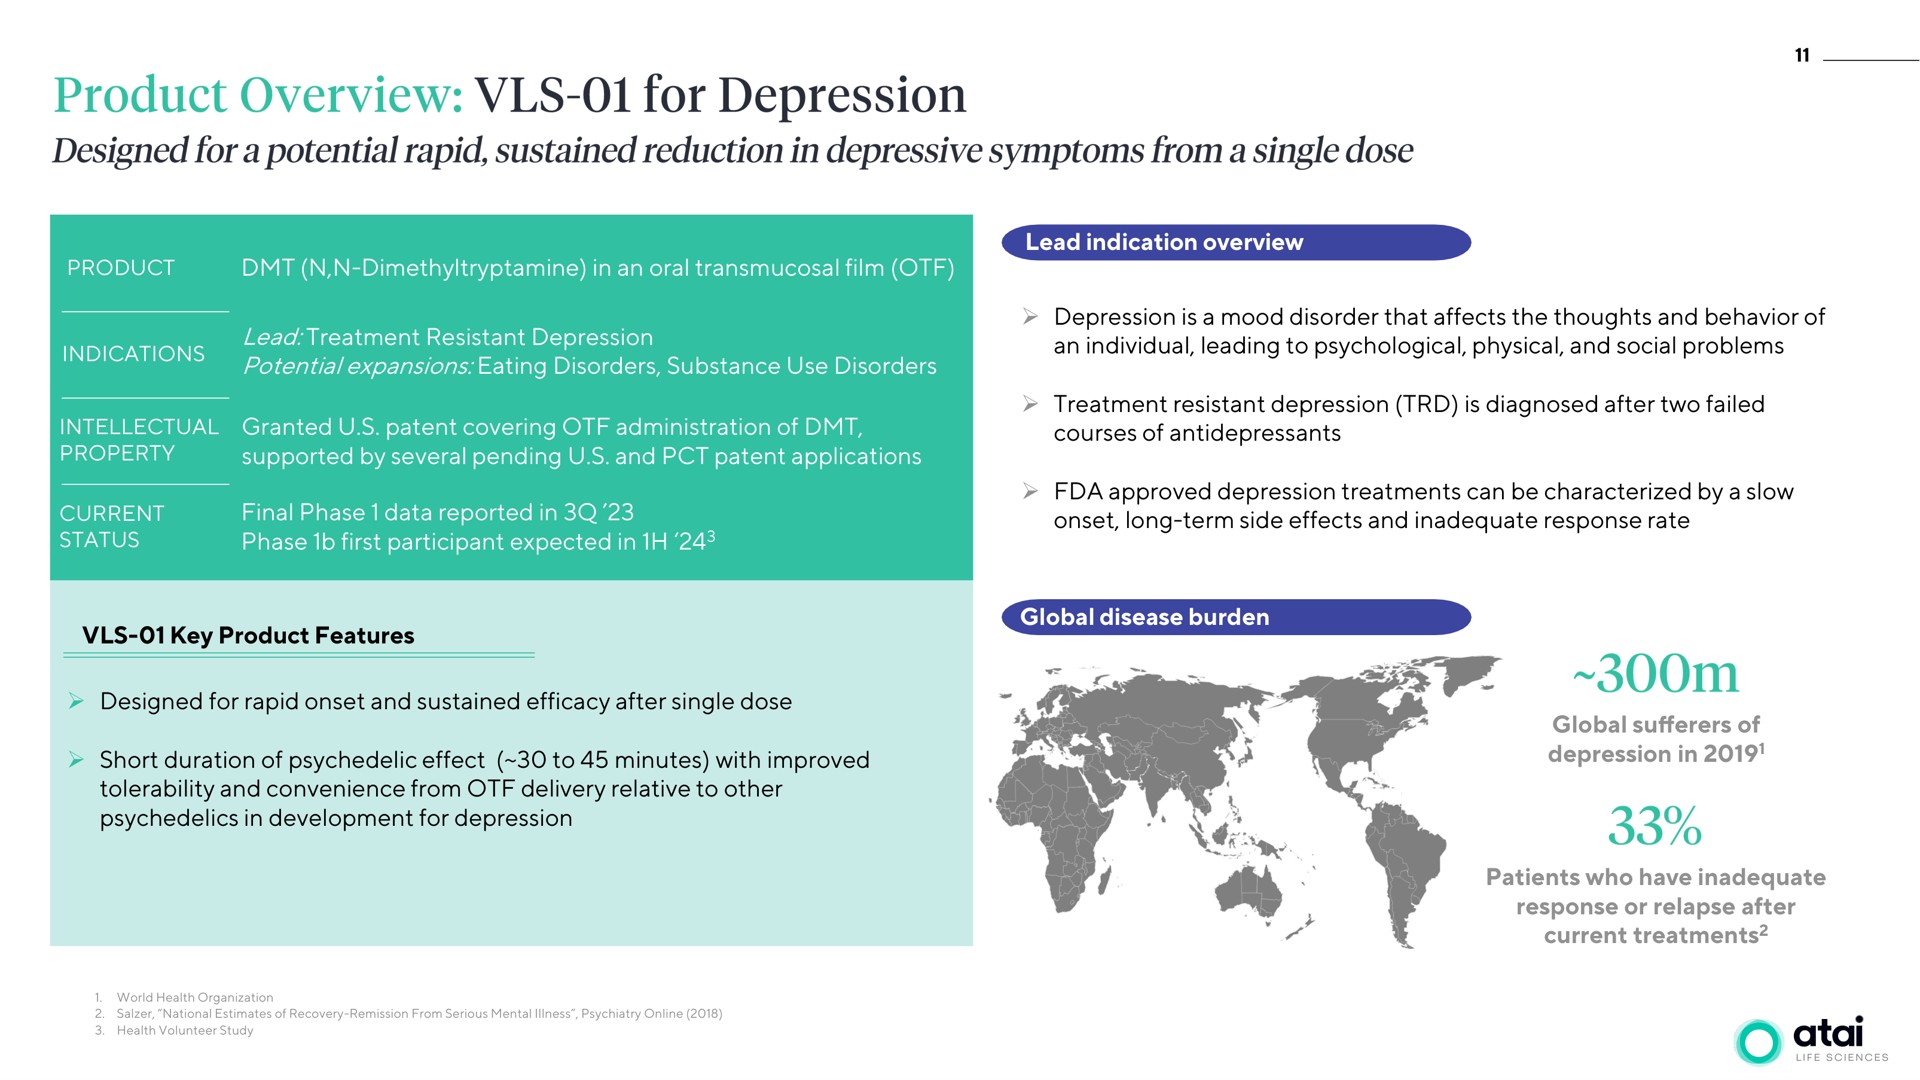 product overview for depression | ATAI